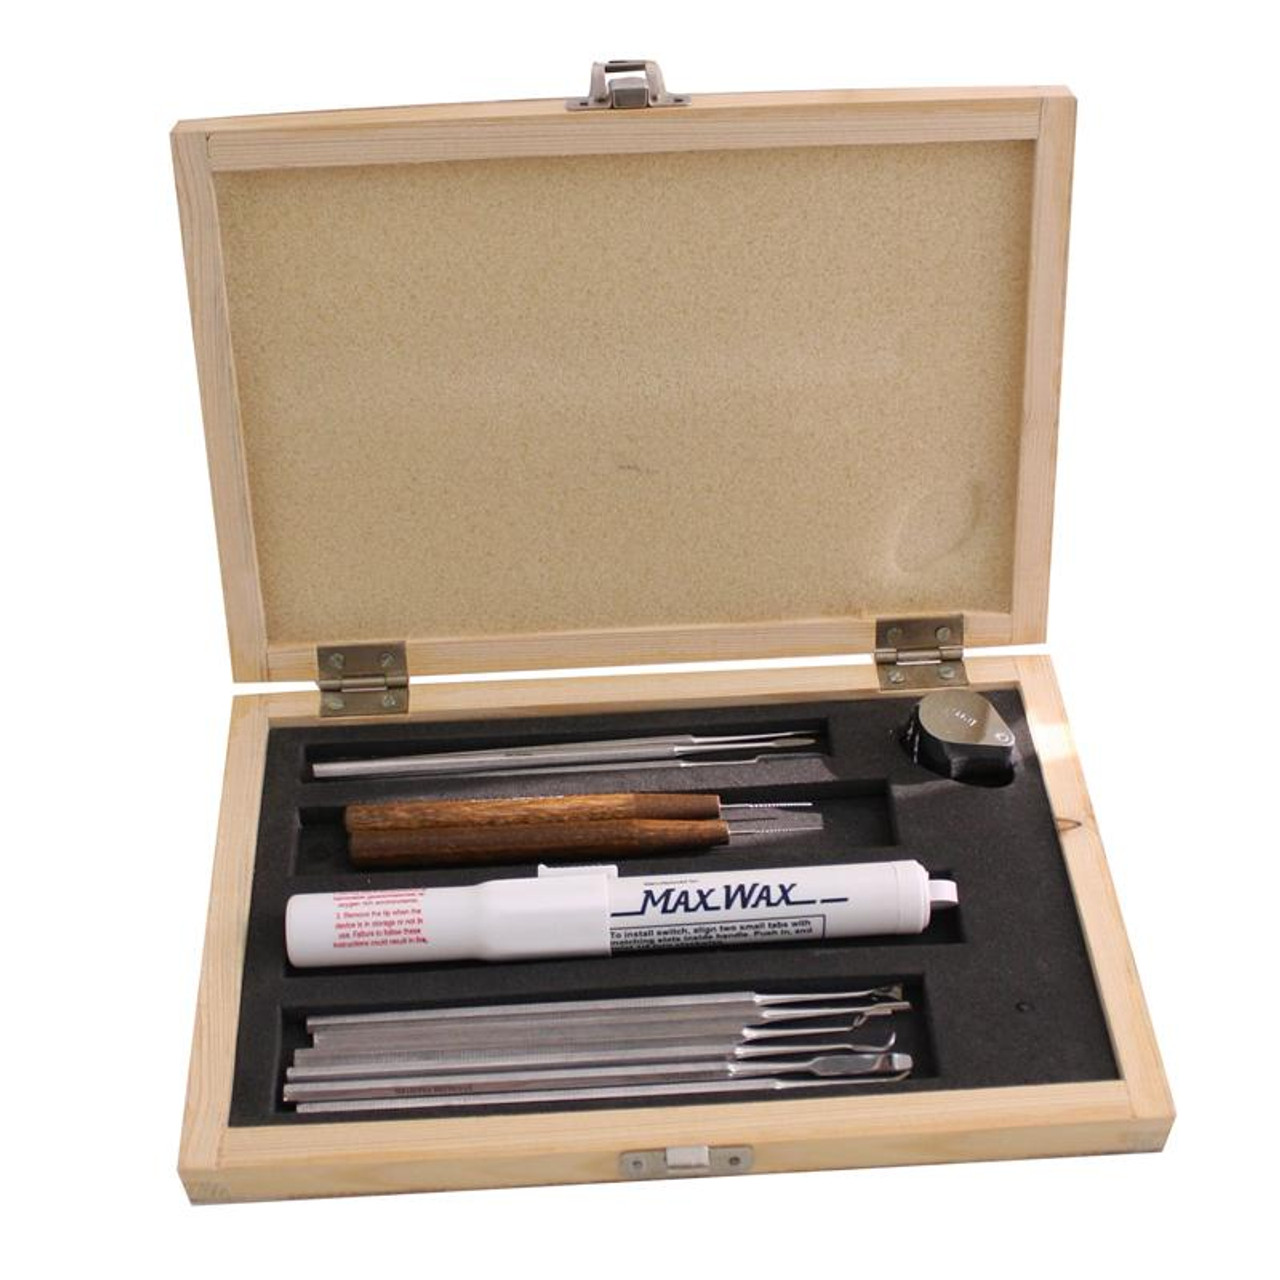 Instrument kit for wax carving